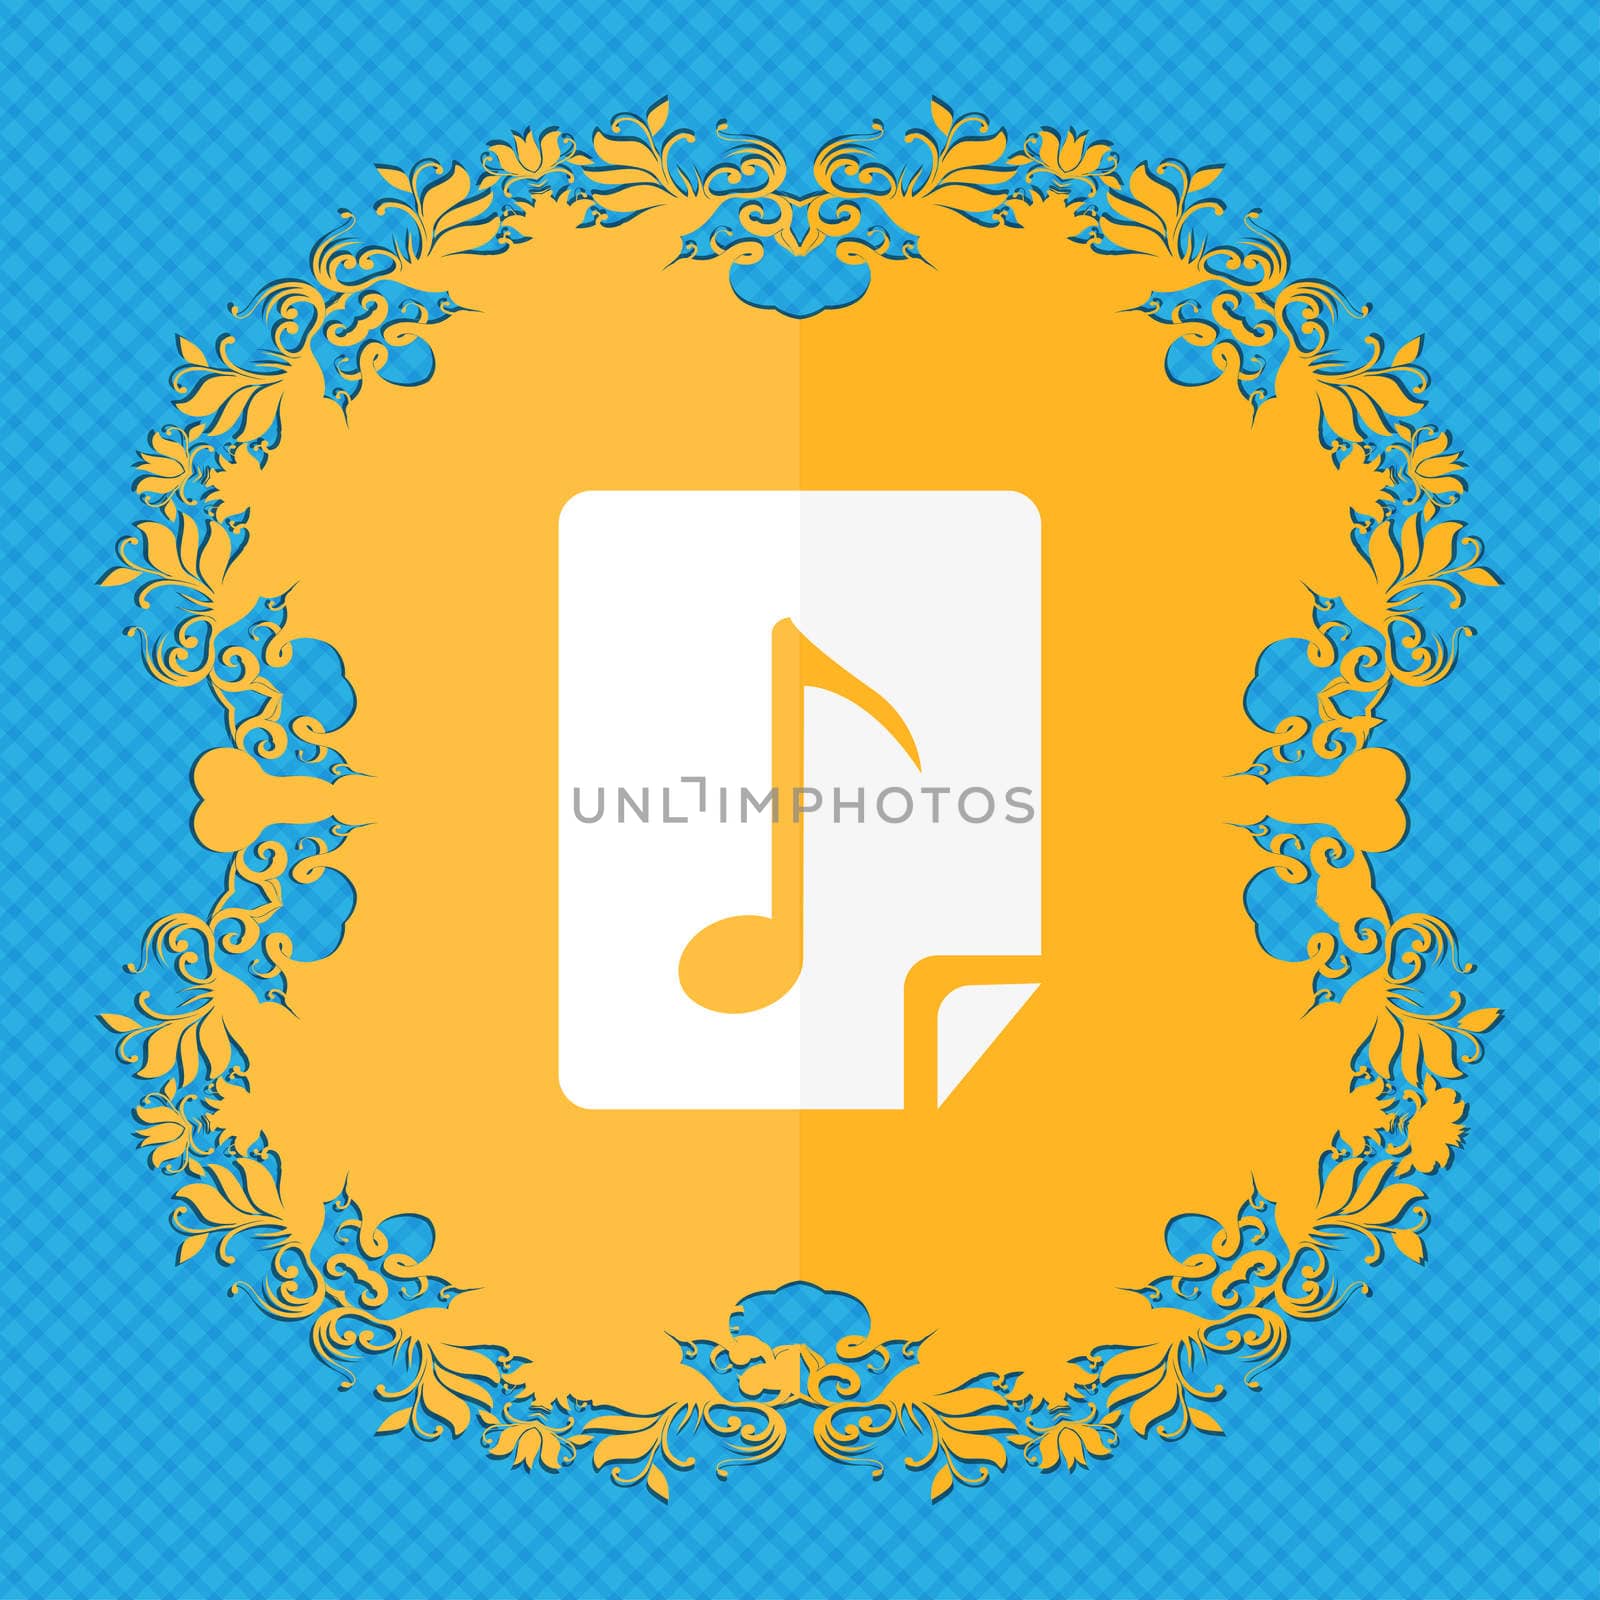 Audio, MP3 file icon sign. Floral flat design on a blue abstract background with place for your text. illustration